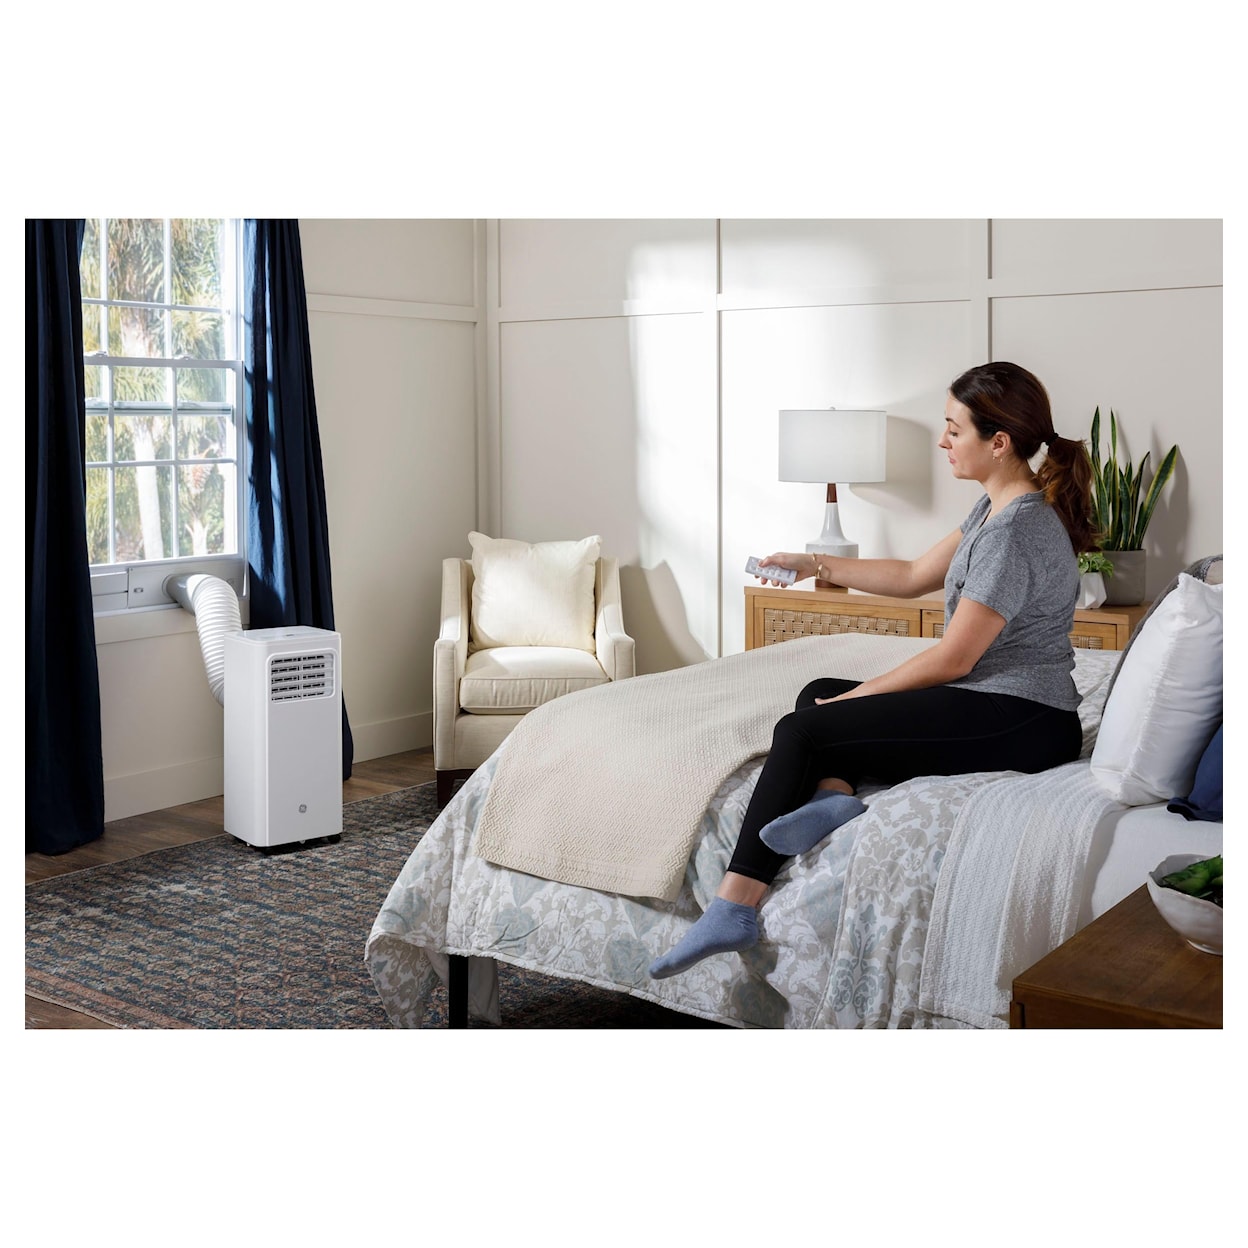 GE Appliances Air Conditioners Portable Air Conditioner